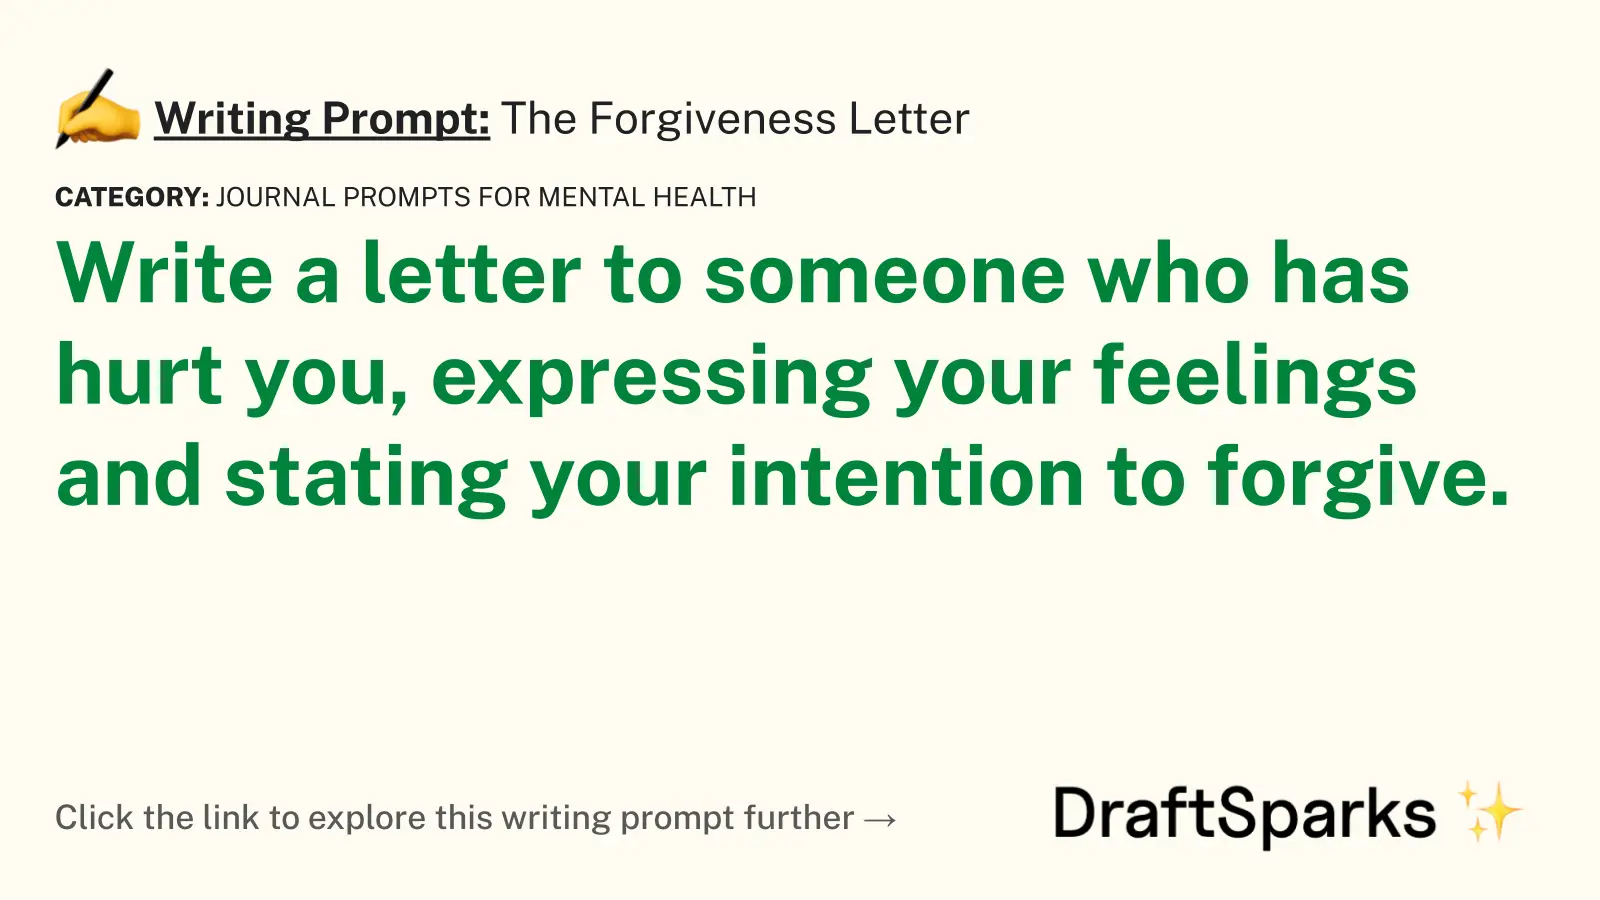 The Forgiveness Letter